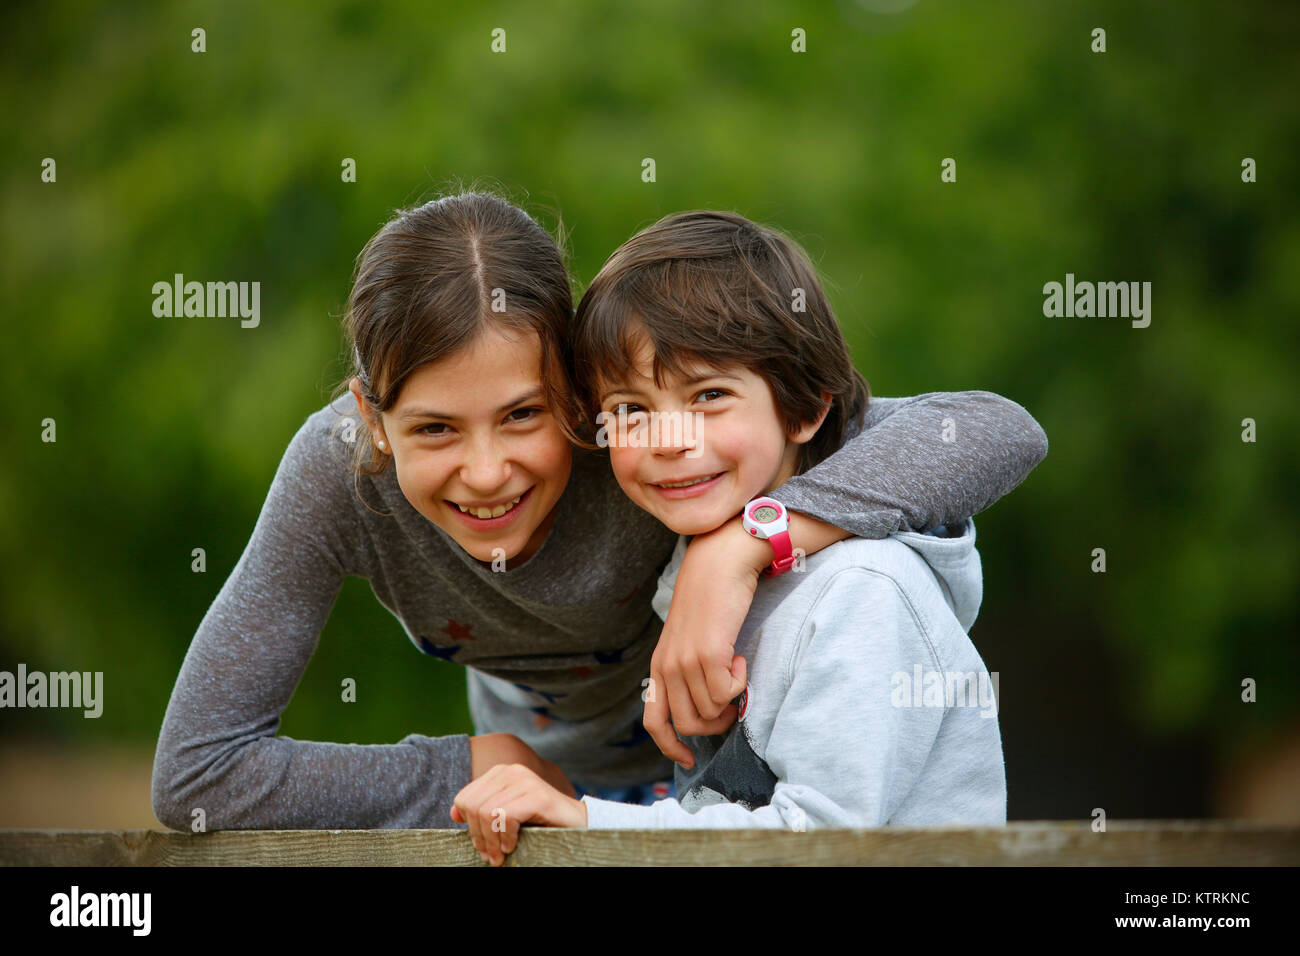 Sister giving her younger brother a hug Stock Photo